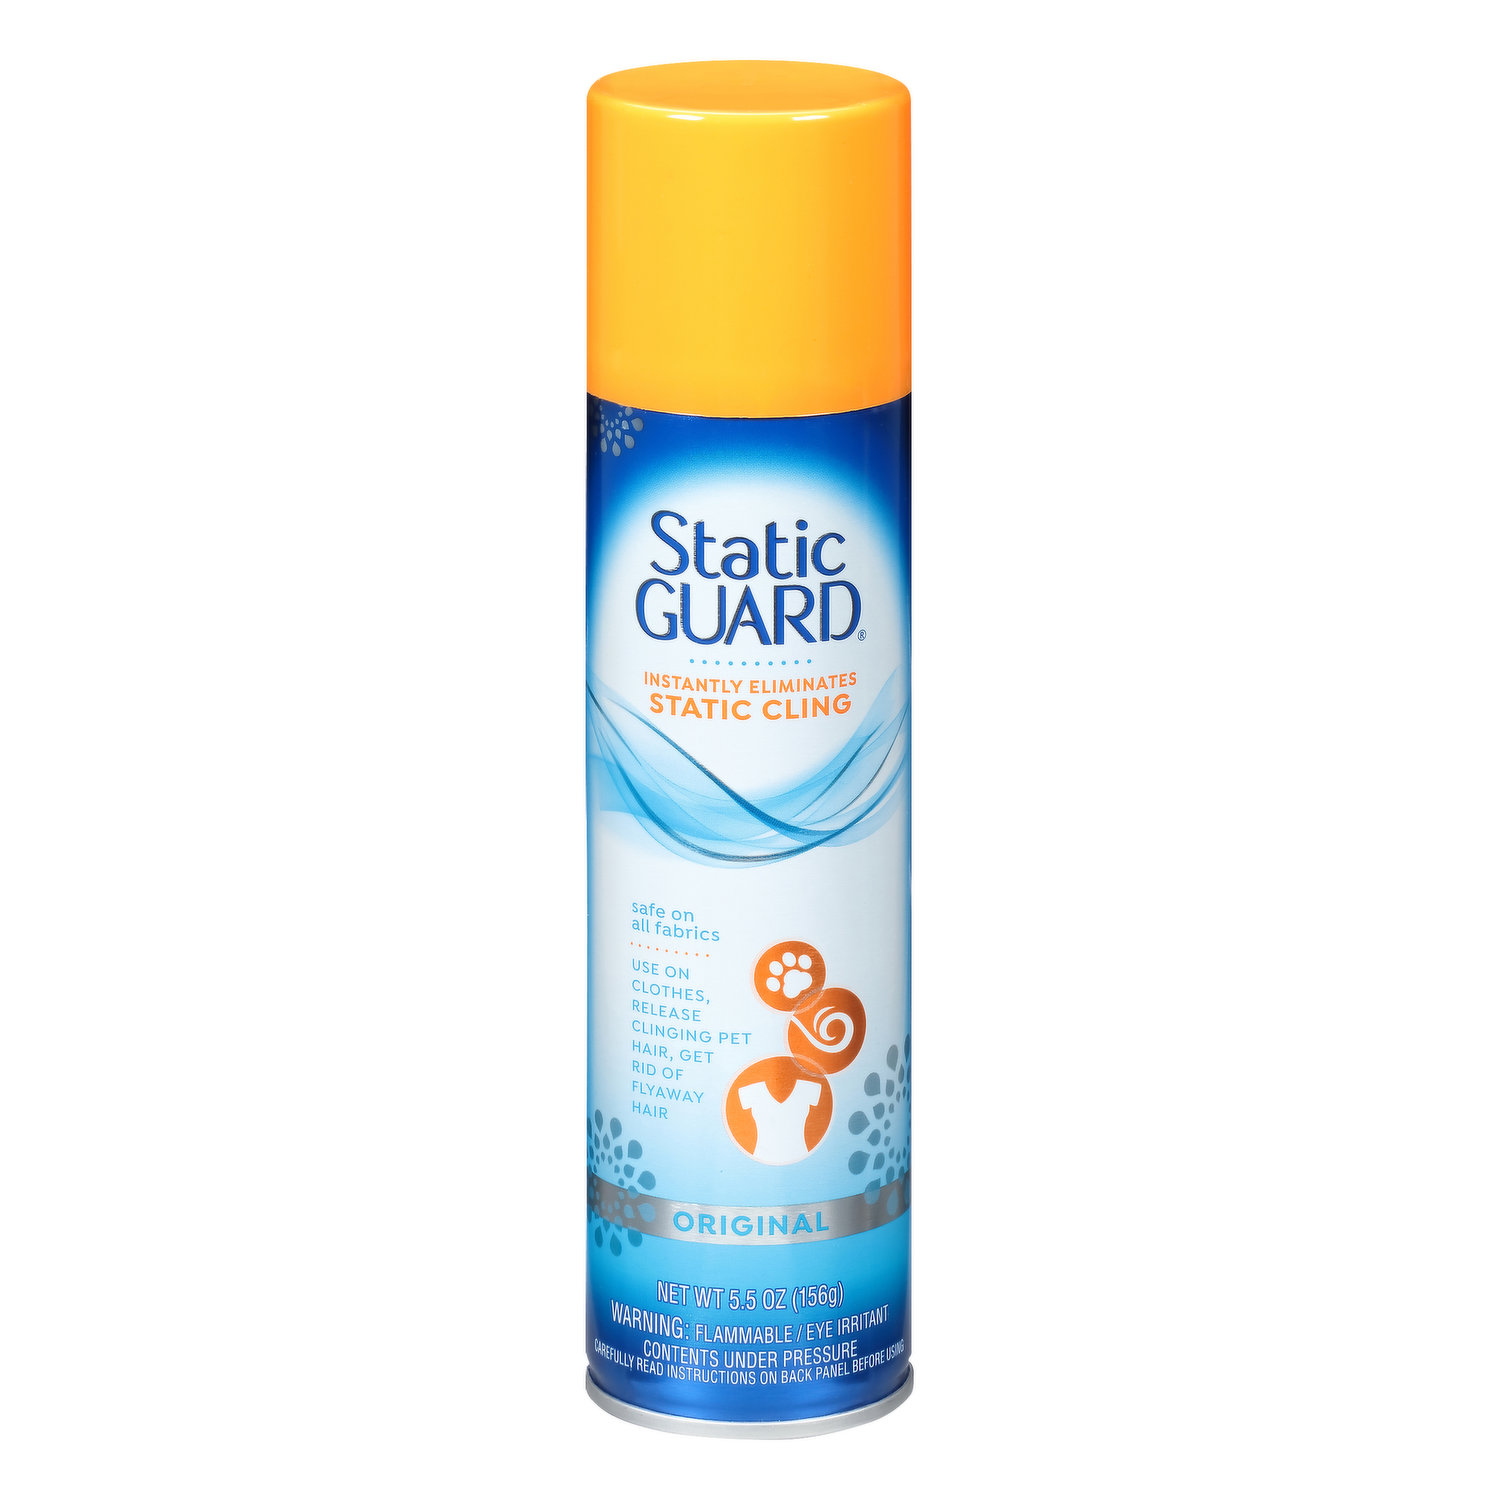 Faultless Premium Luxe Spray Starch for Ironing. Reduces Ironing Time with.